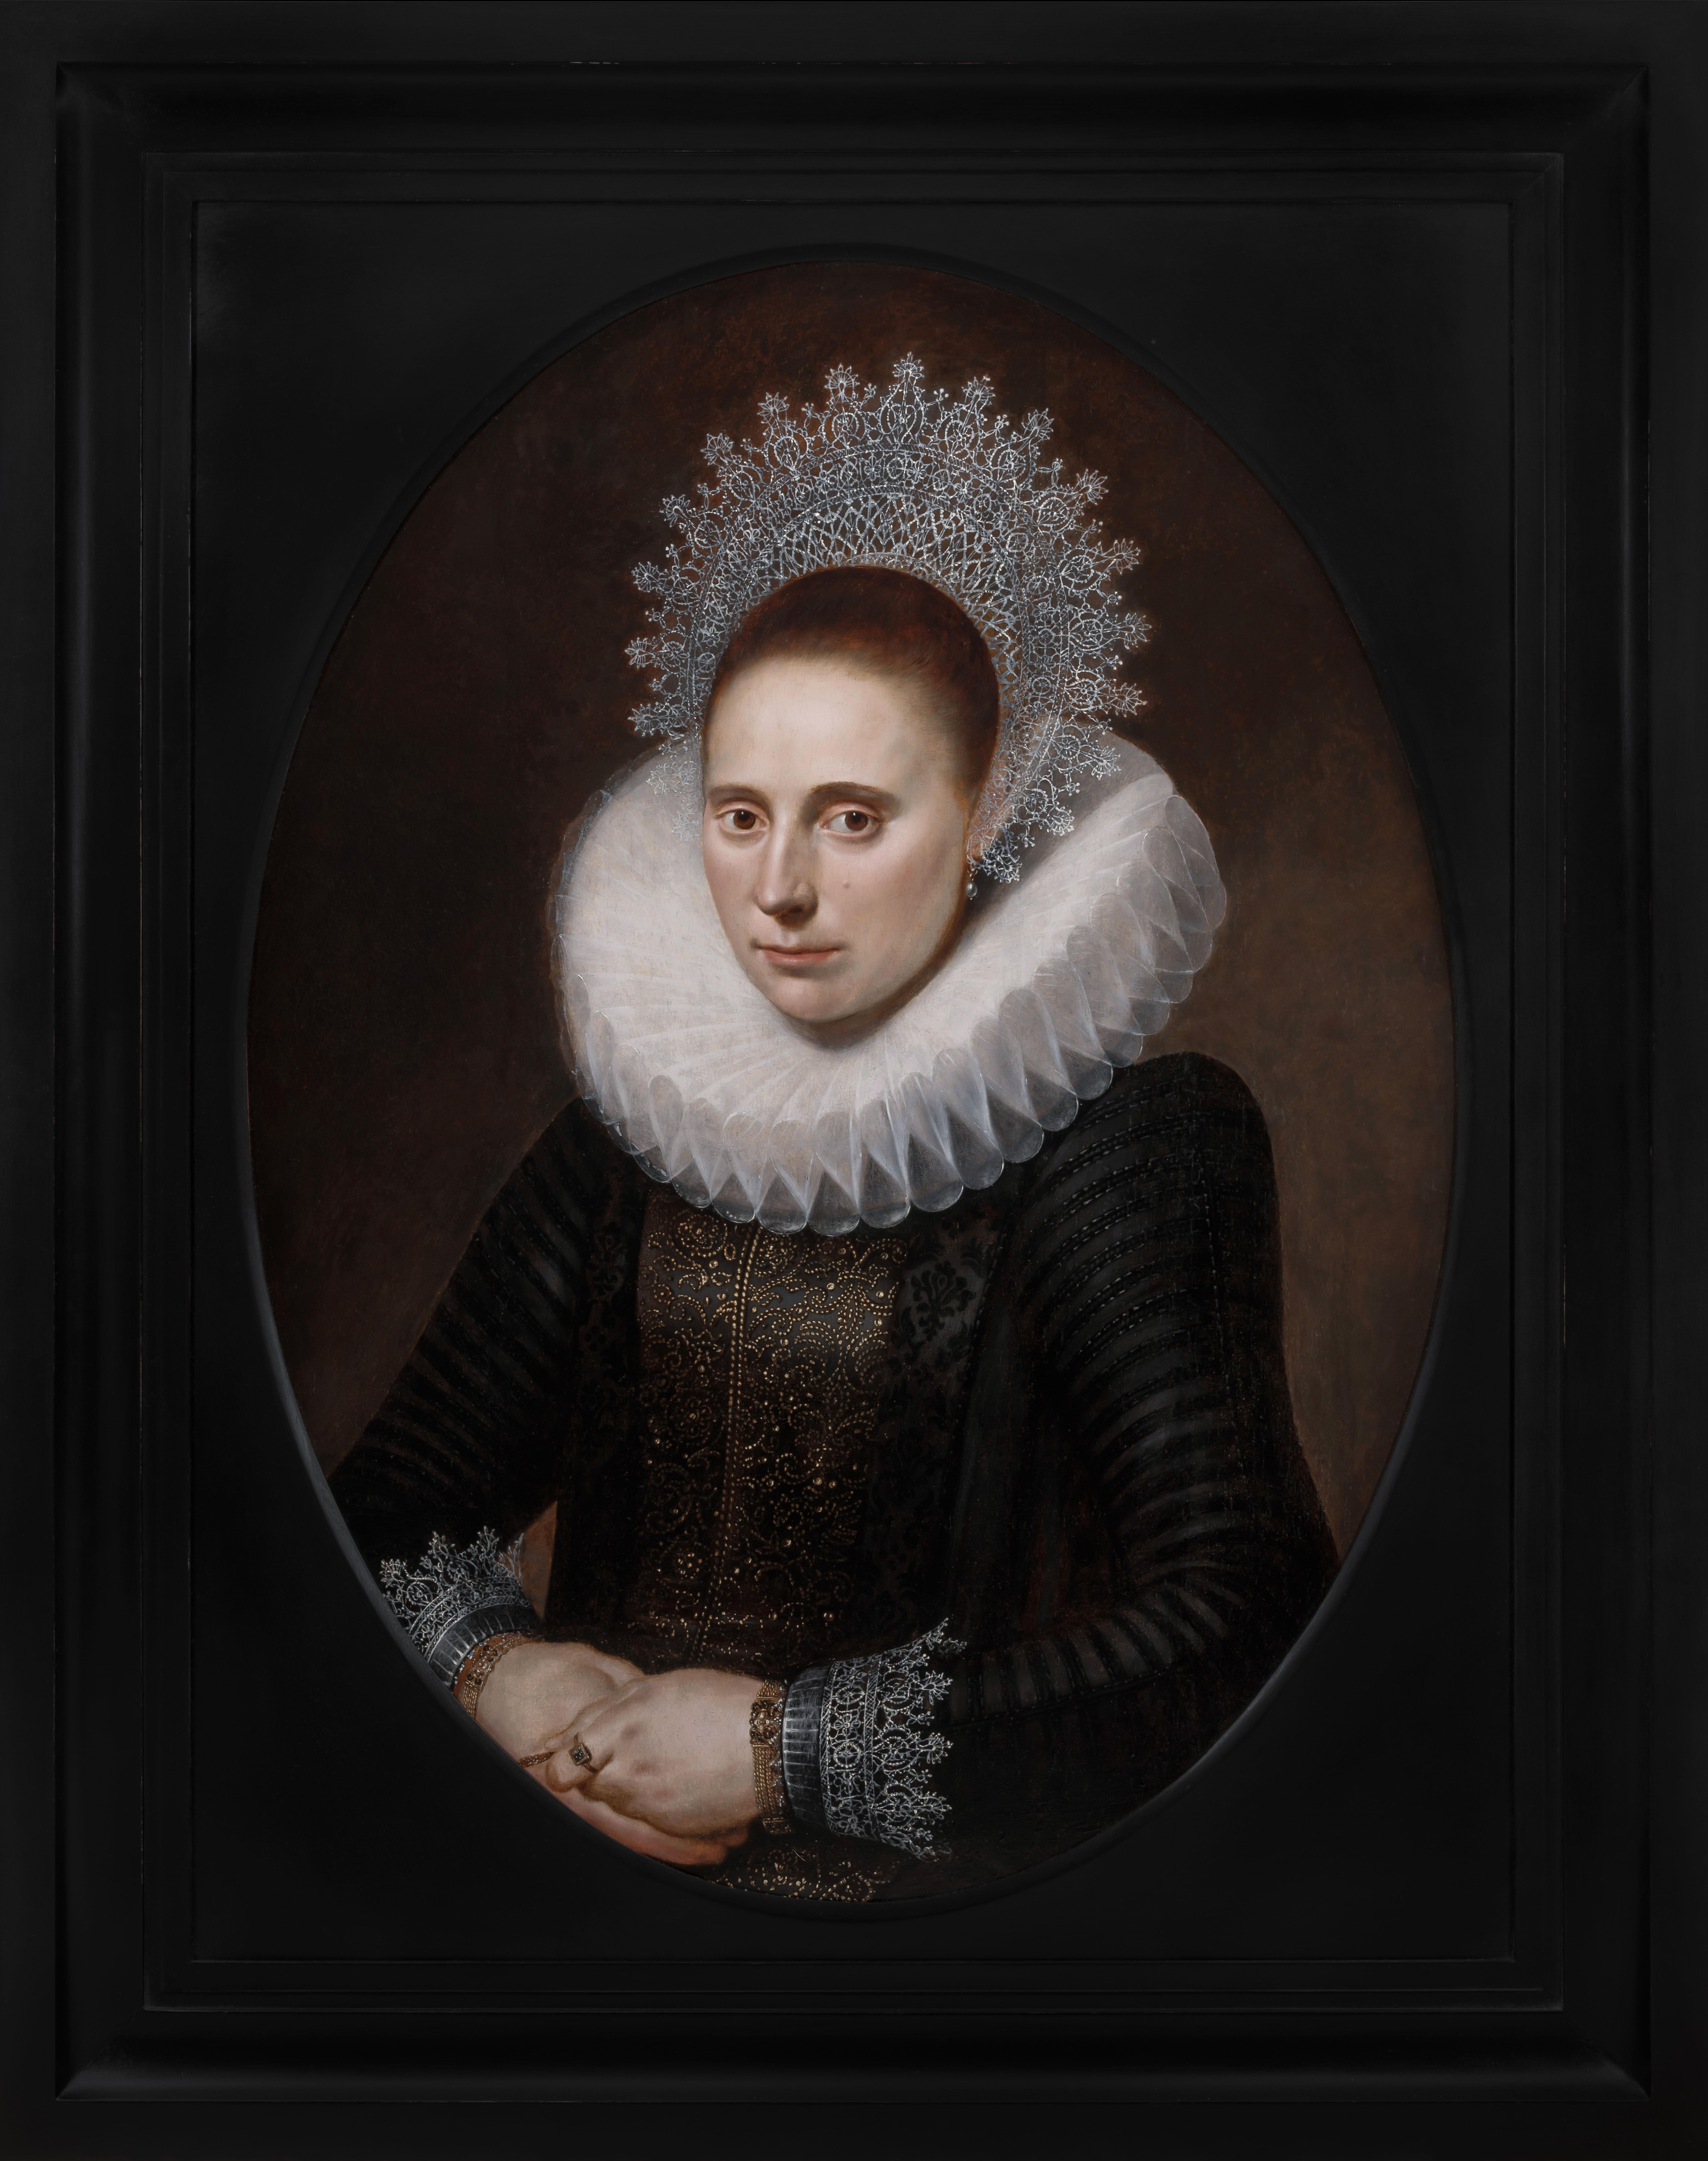 Portrait of a Lady in an Elaborate Ruff & Lace Coif c.1610-20, Dutch Old Master - Painting by Cornelius van der Voort